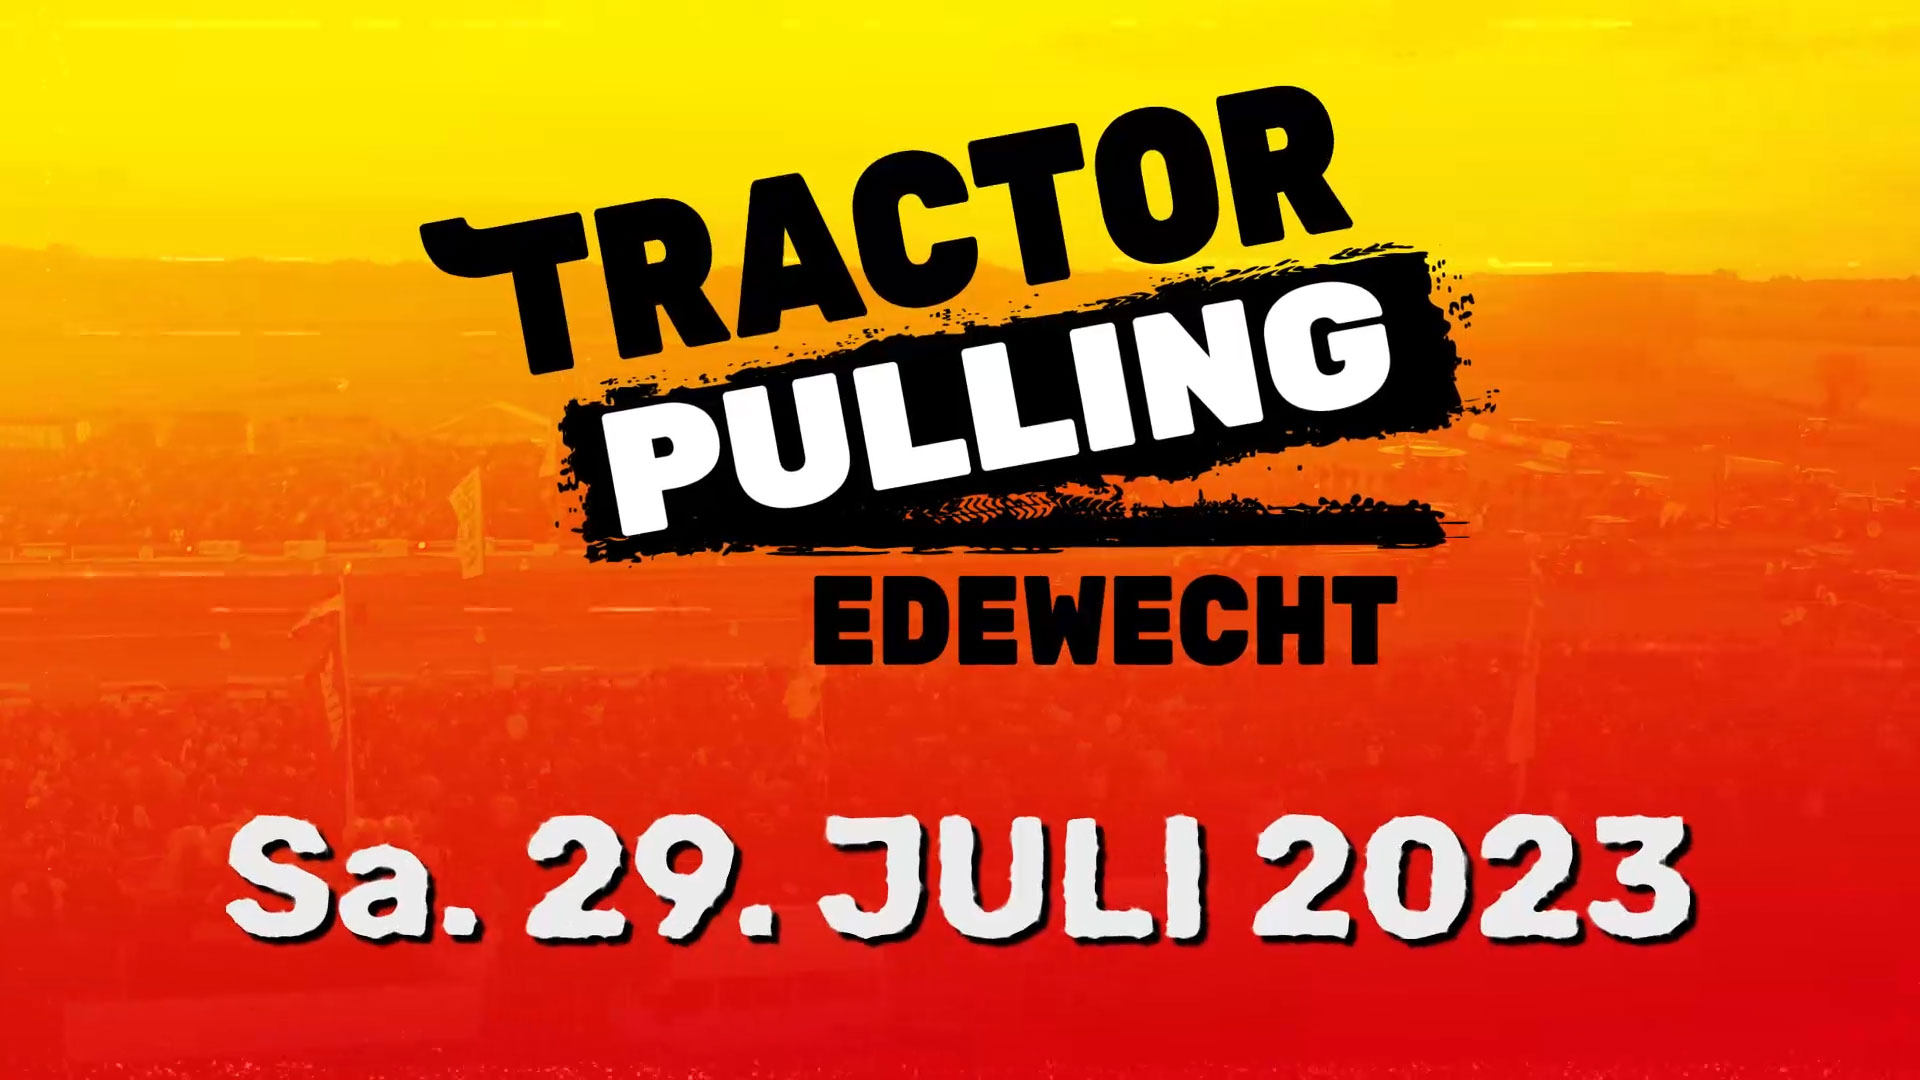 Pull Pulling Tractor not enough! is Edewecht — Full